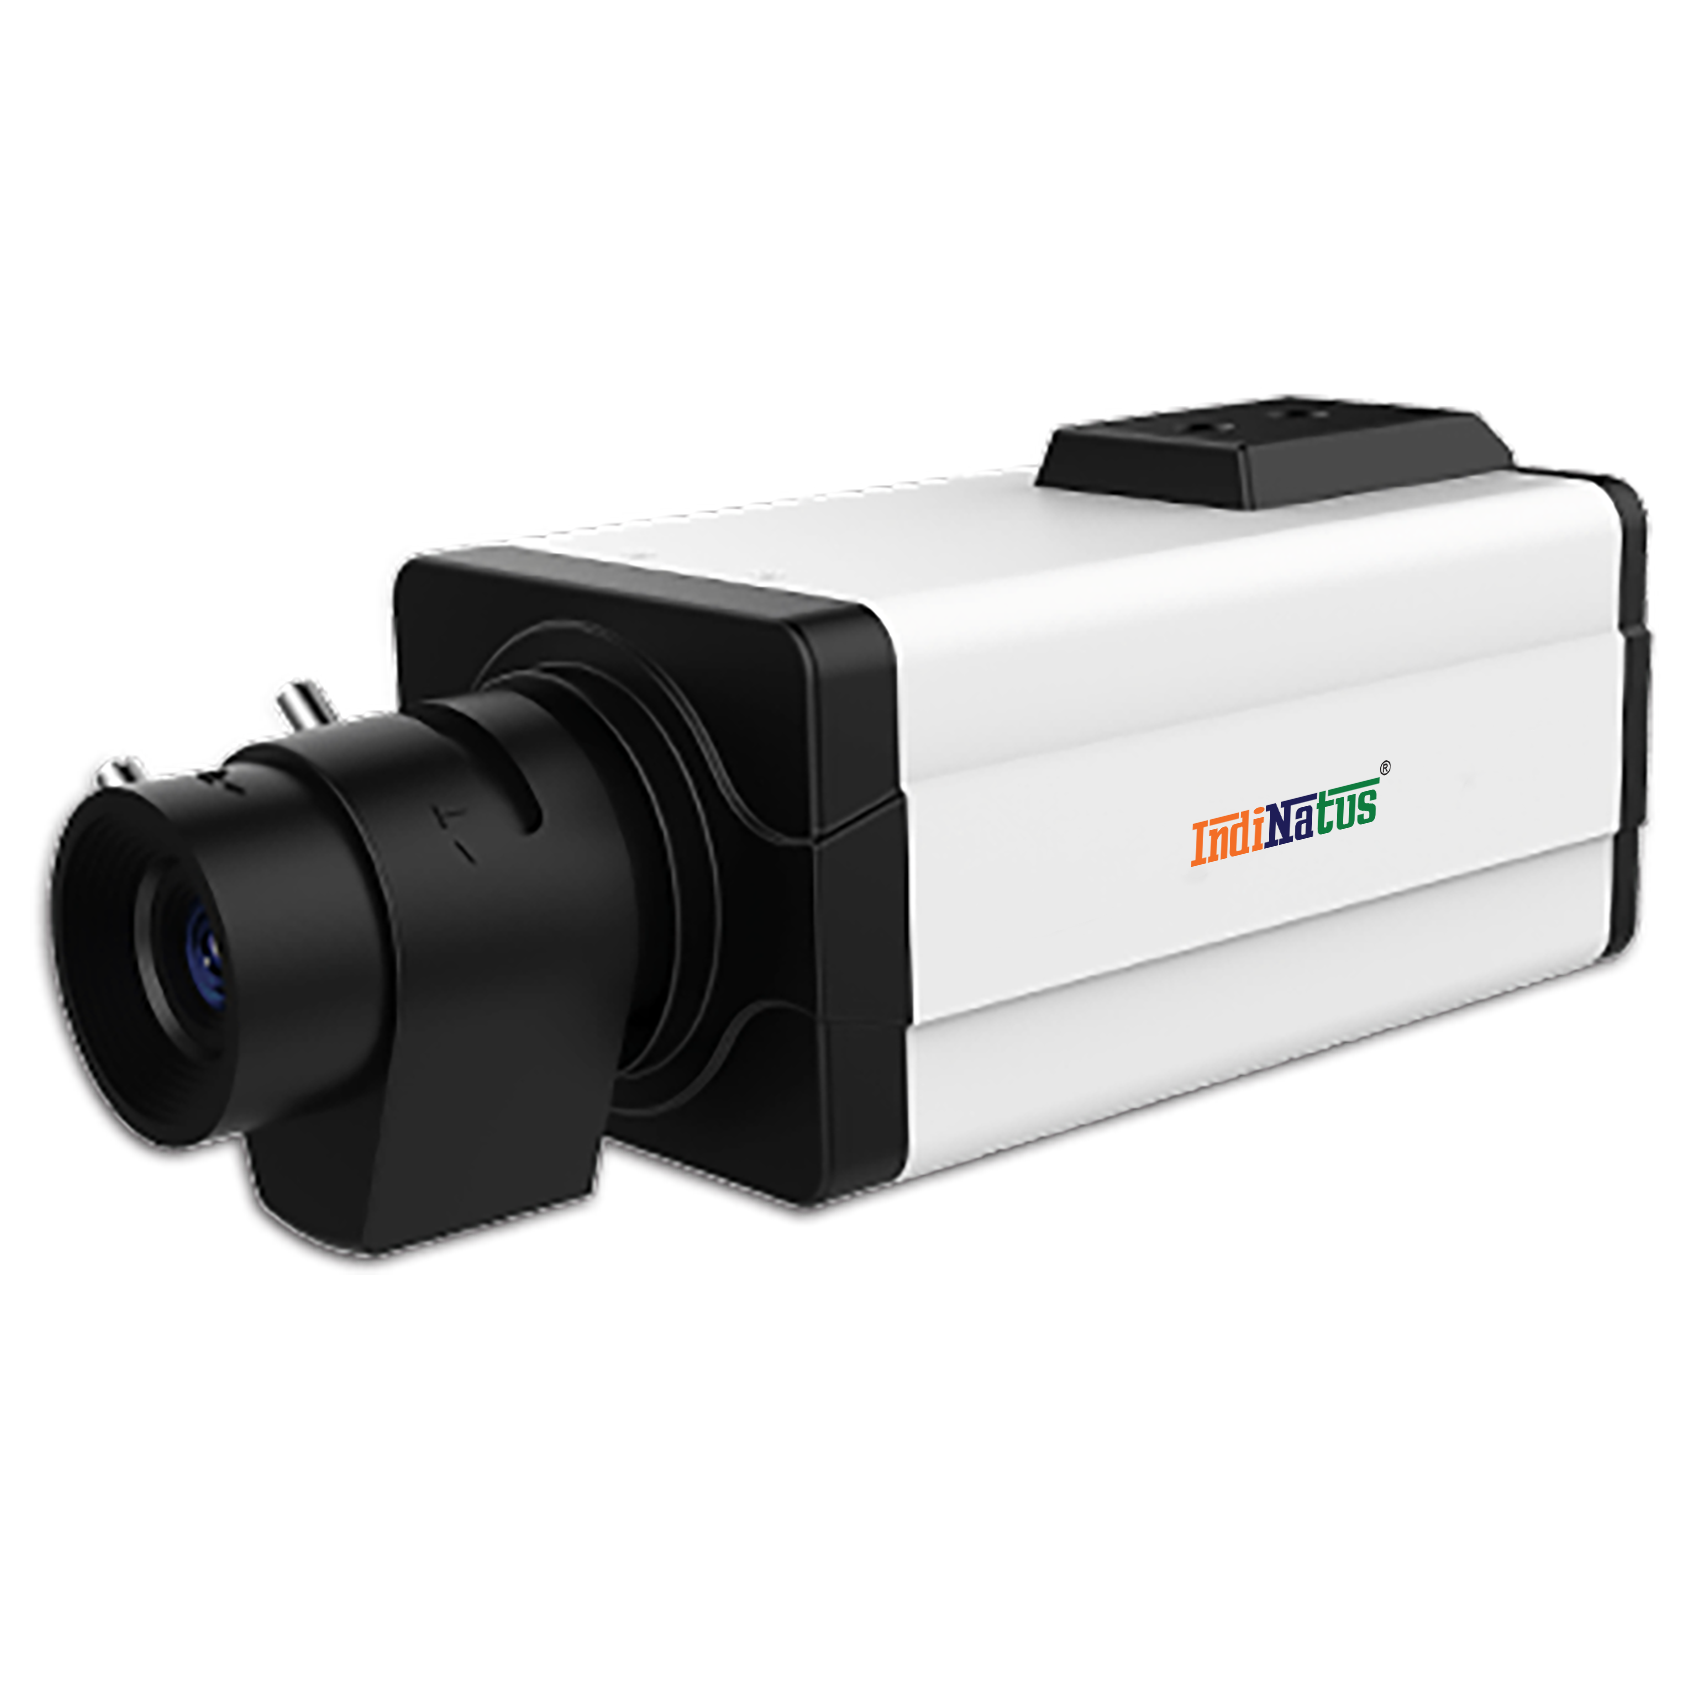  Full HD Fixed Box Type IP Colour Camera, IN-IPC2R32KXV,  IndiNatus® India Private Limited - India Ka Apna Brand, Indian CCTV  Brand,  Make In India CCTV camera, Make in india cctv camera brand available on gem portal, IP Network Camera, Indian brand CCTV Camera, Best OEM Of CCTV in India      